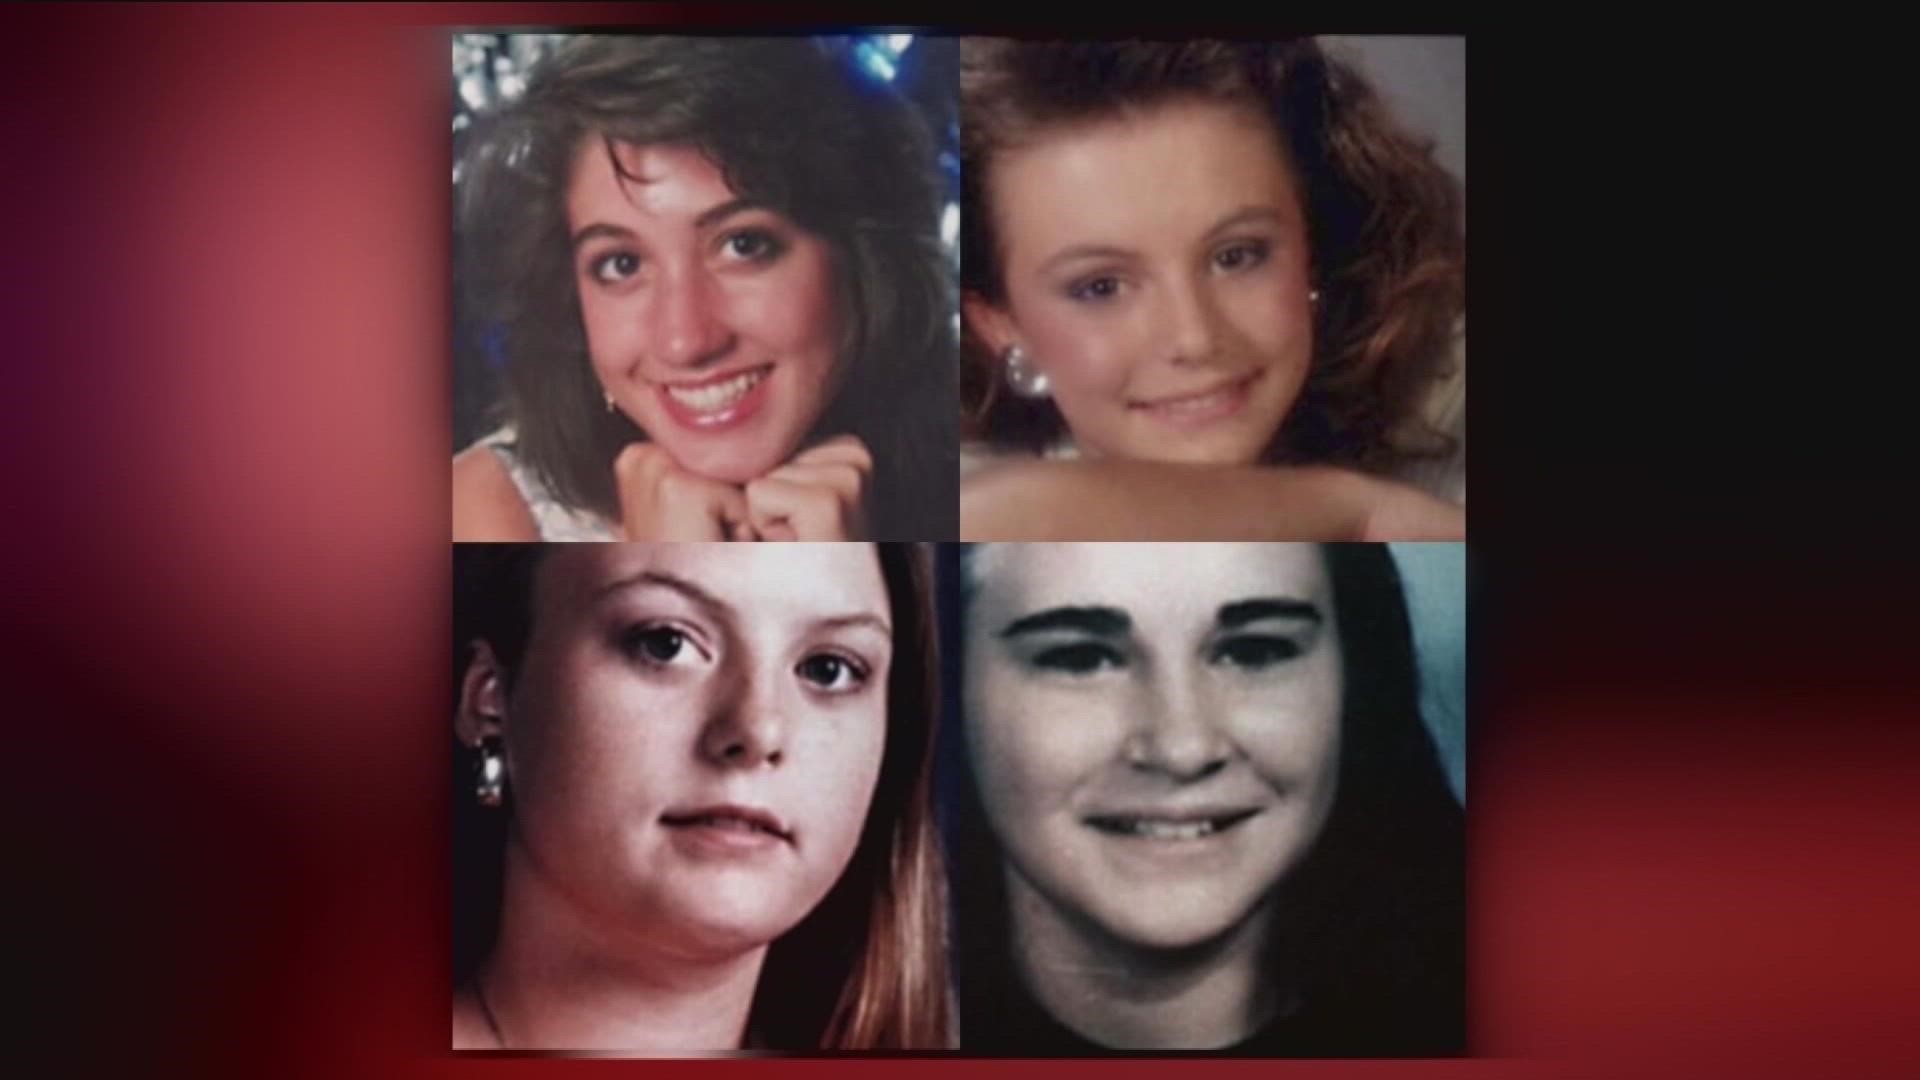 The four girls were found dead inside an I Can't Believe It's Yogurt shop in North Austin in 1991. The case hasn't been solved but a new bill passed might help.